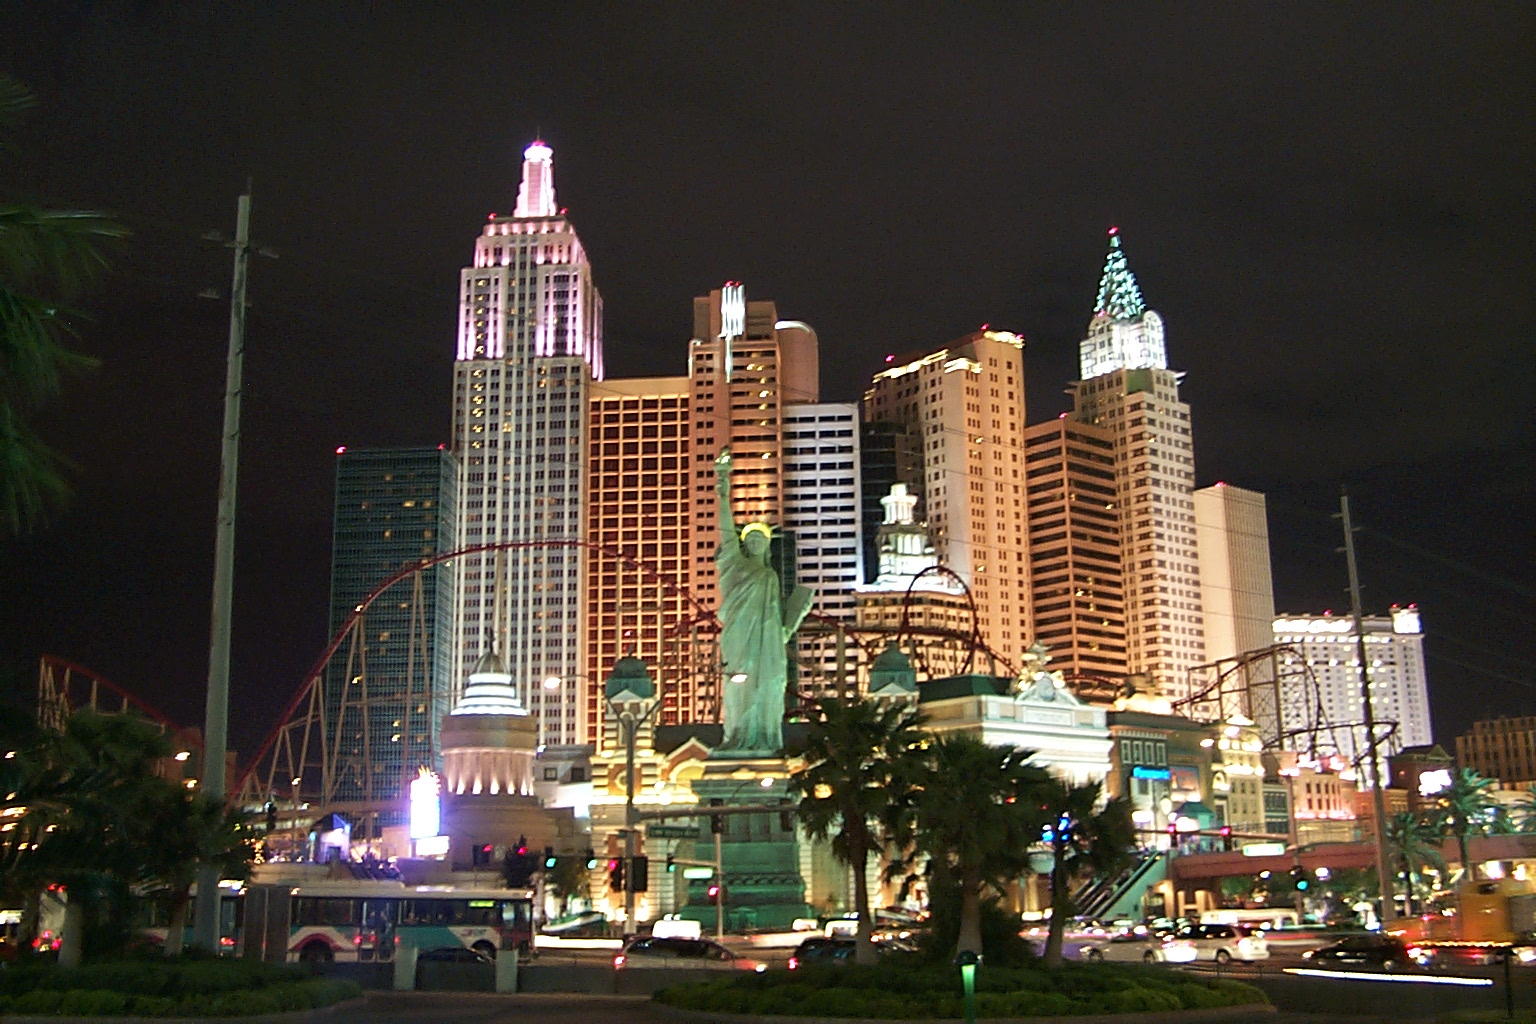 The New York, New York Casino at night. We were instantly in a New York state of mind when we visited this place.